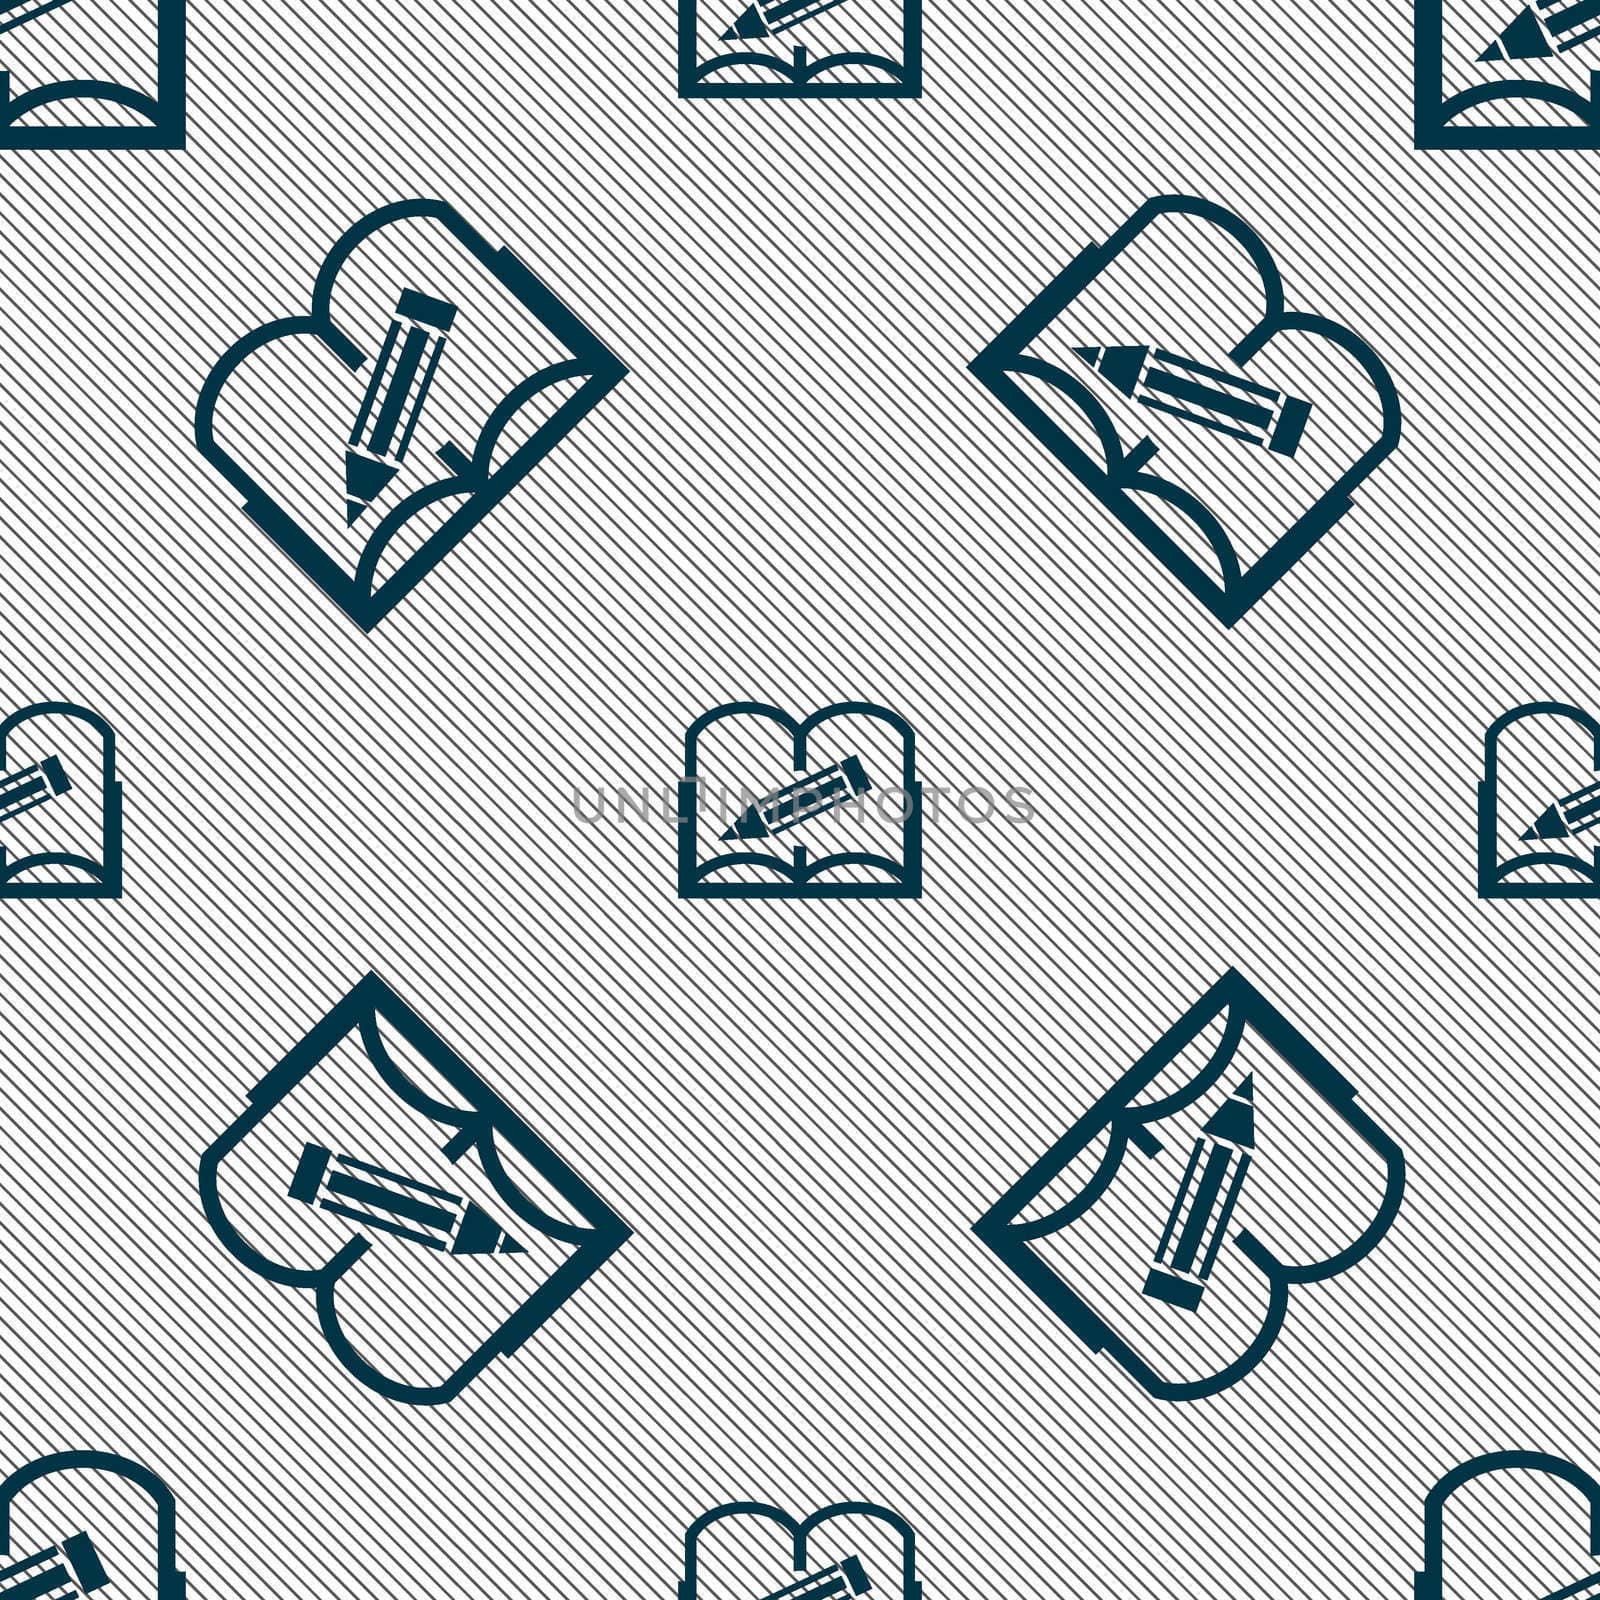 Book sign icon. Open book symbol. Seamless pattern with geometric texture.  by serhii_lohvyniuk